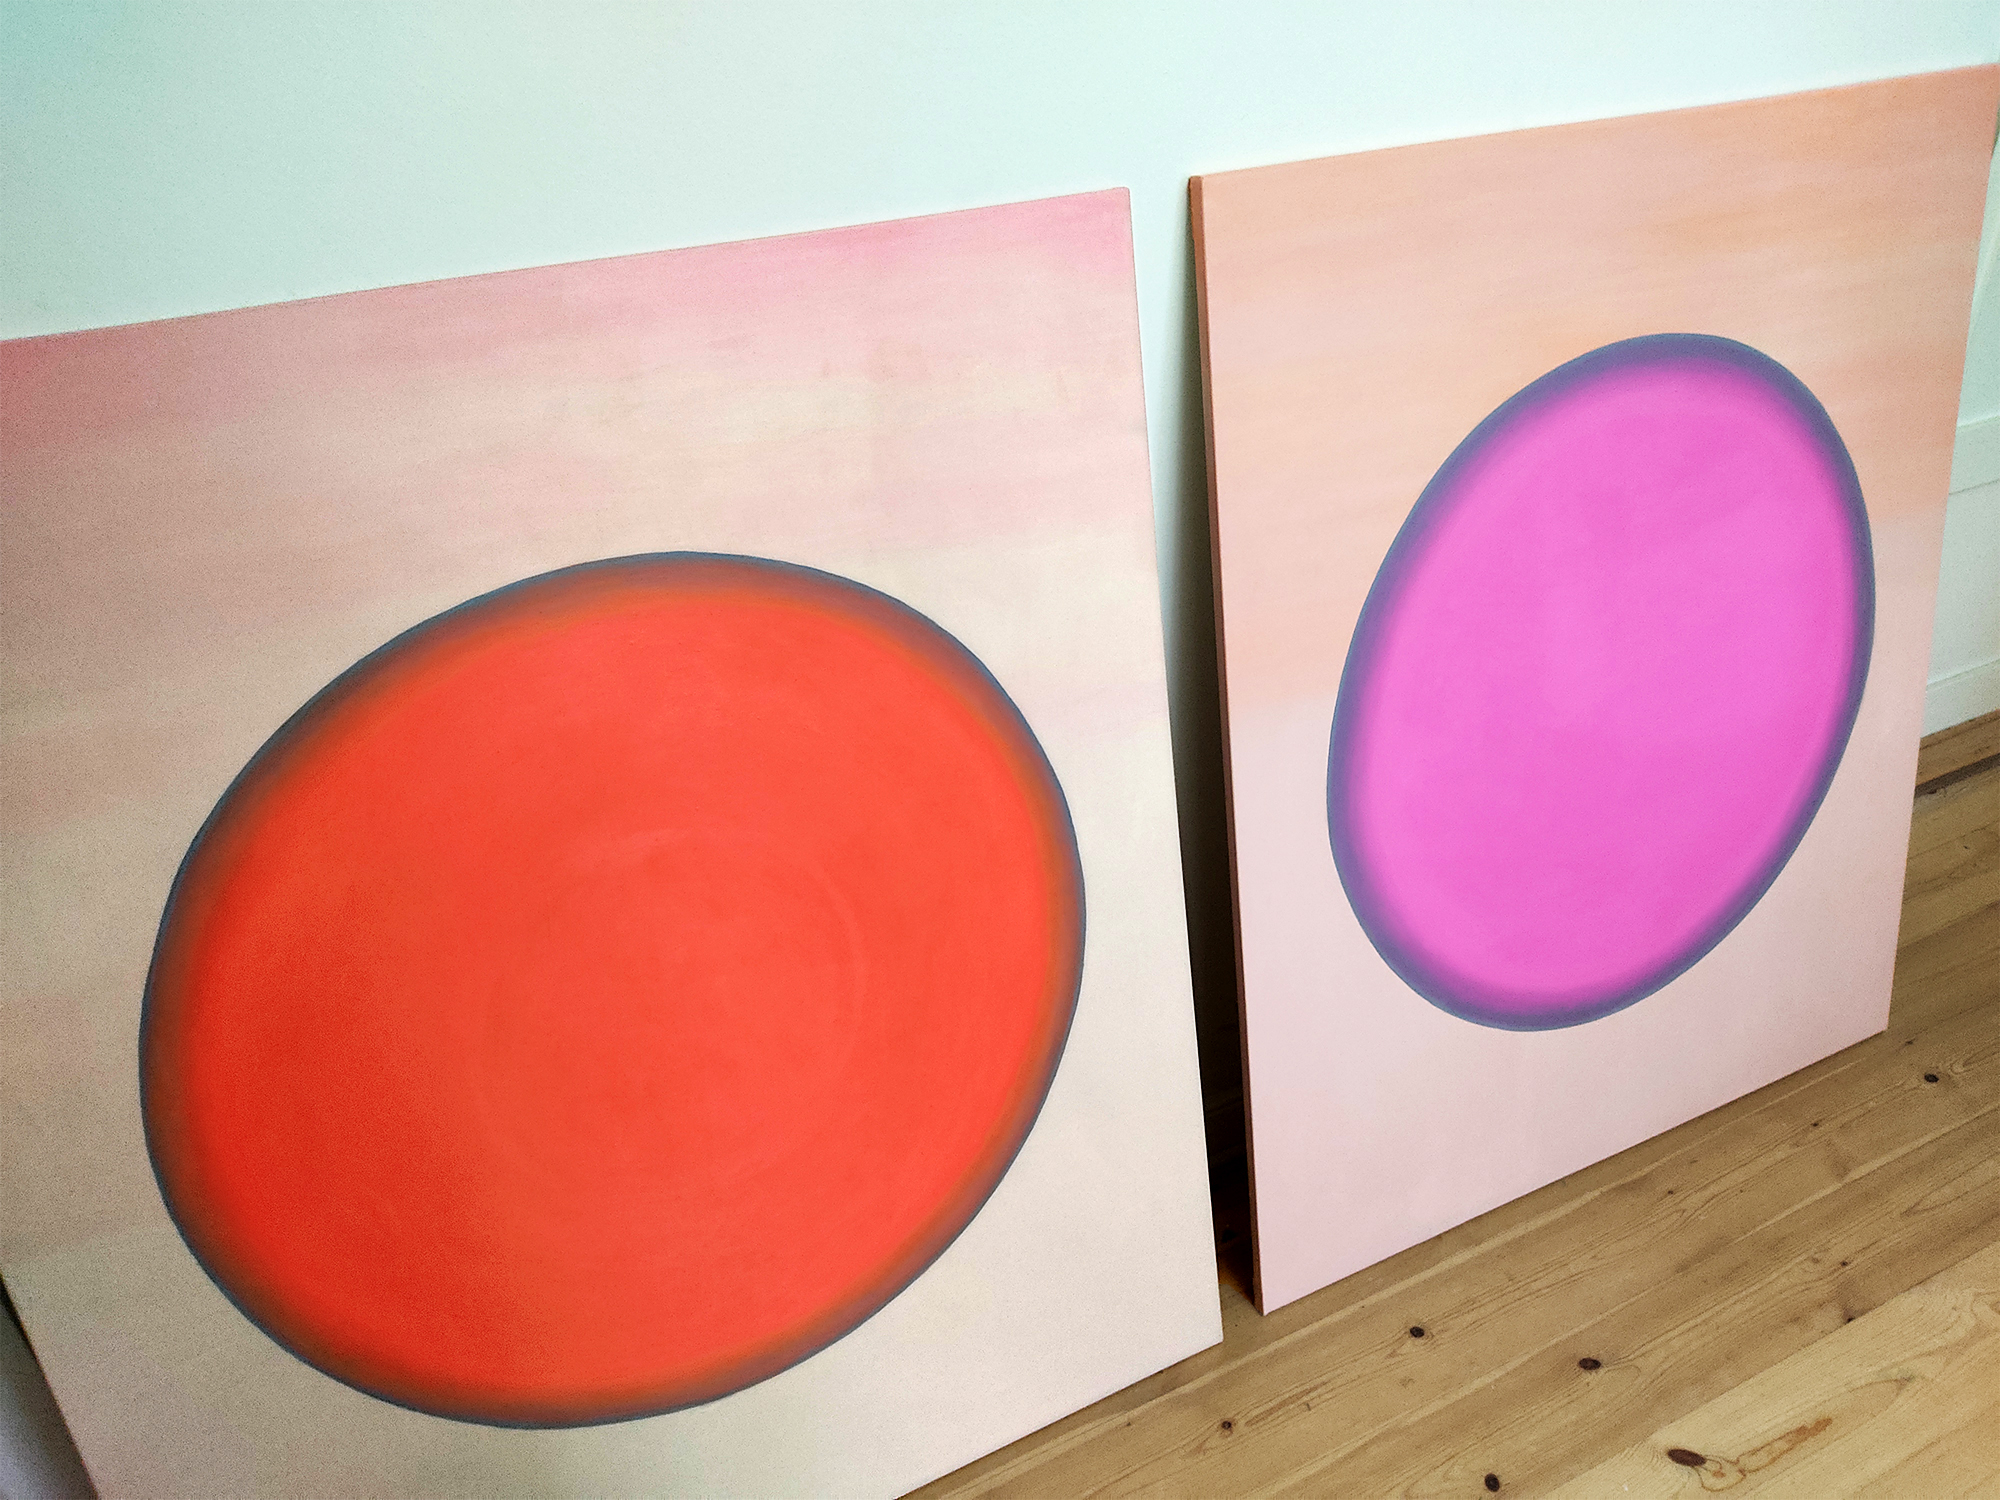 paintings, aesthetic, colorful, geometric, surrealistic, moods, science, sky, orange, pastel, pink, acrylic, cotton-canvas, abstract-forms, atmosphere, beautiful, contemporary-art, copenhagen, modern, modern-art, nordic, outer-space, scandinavien, symbolic, symmetry, tranquil, vibrant, Buy original high quality art. Paintings, drawings, limited edition prints & posters by talented artists.